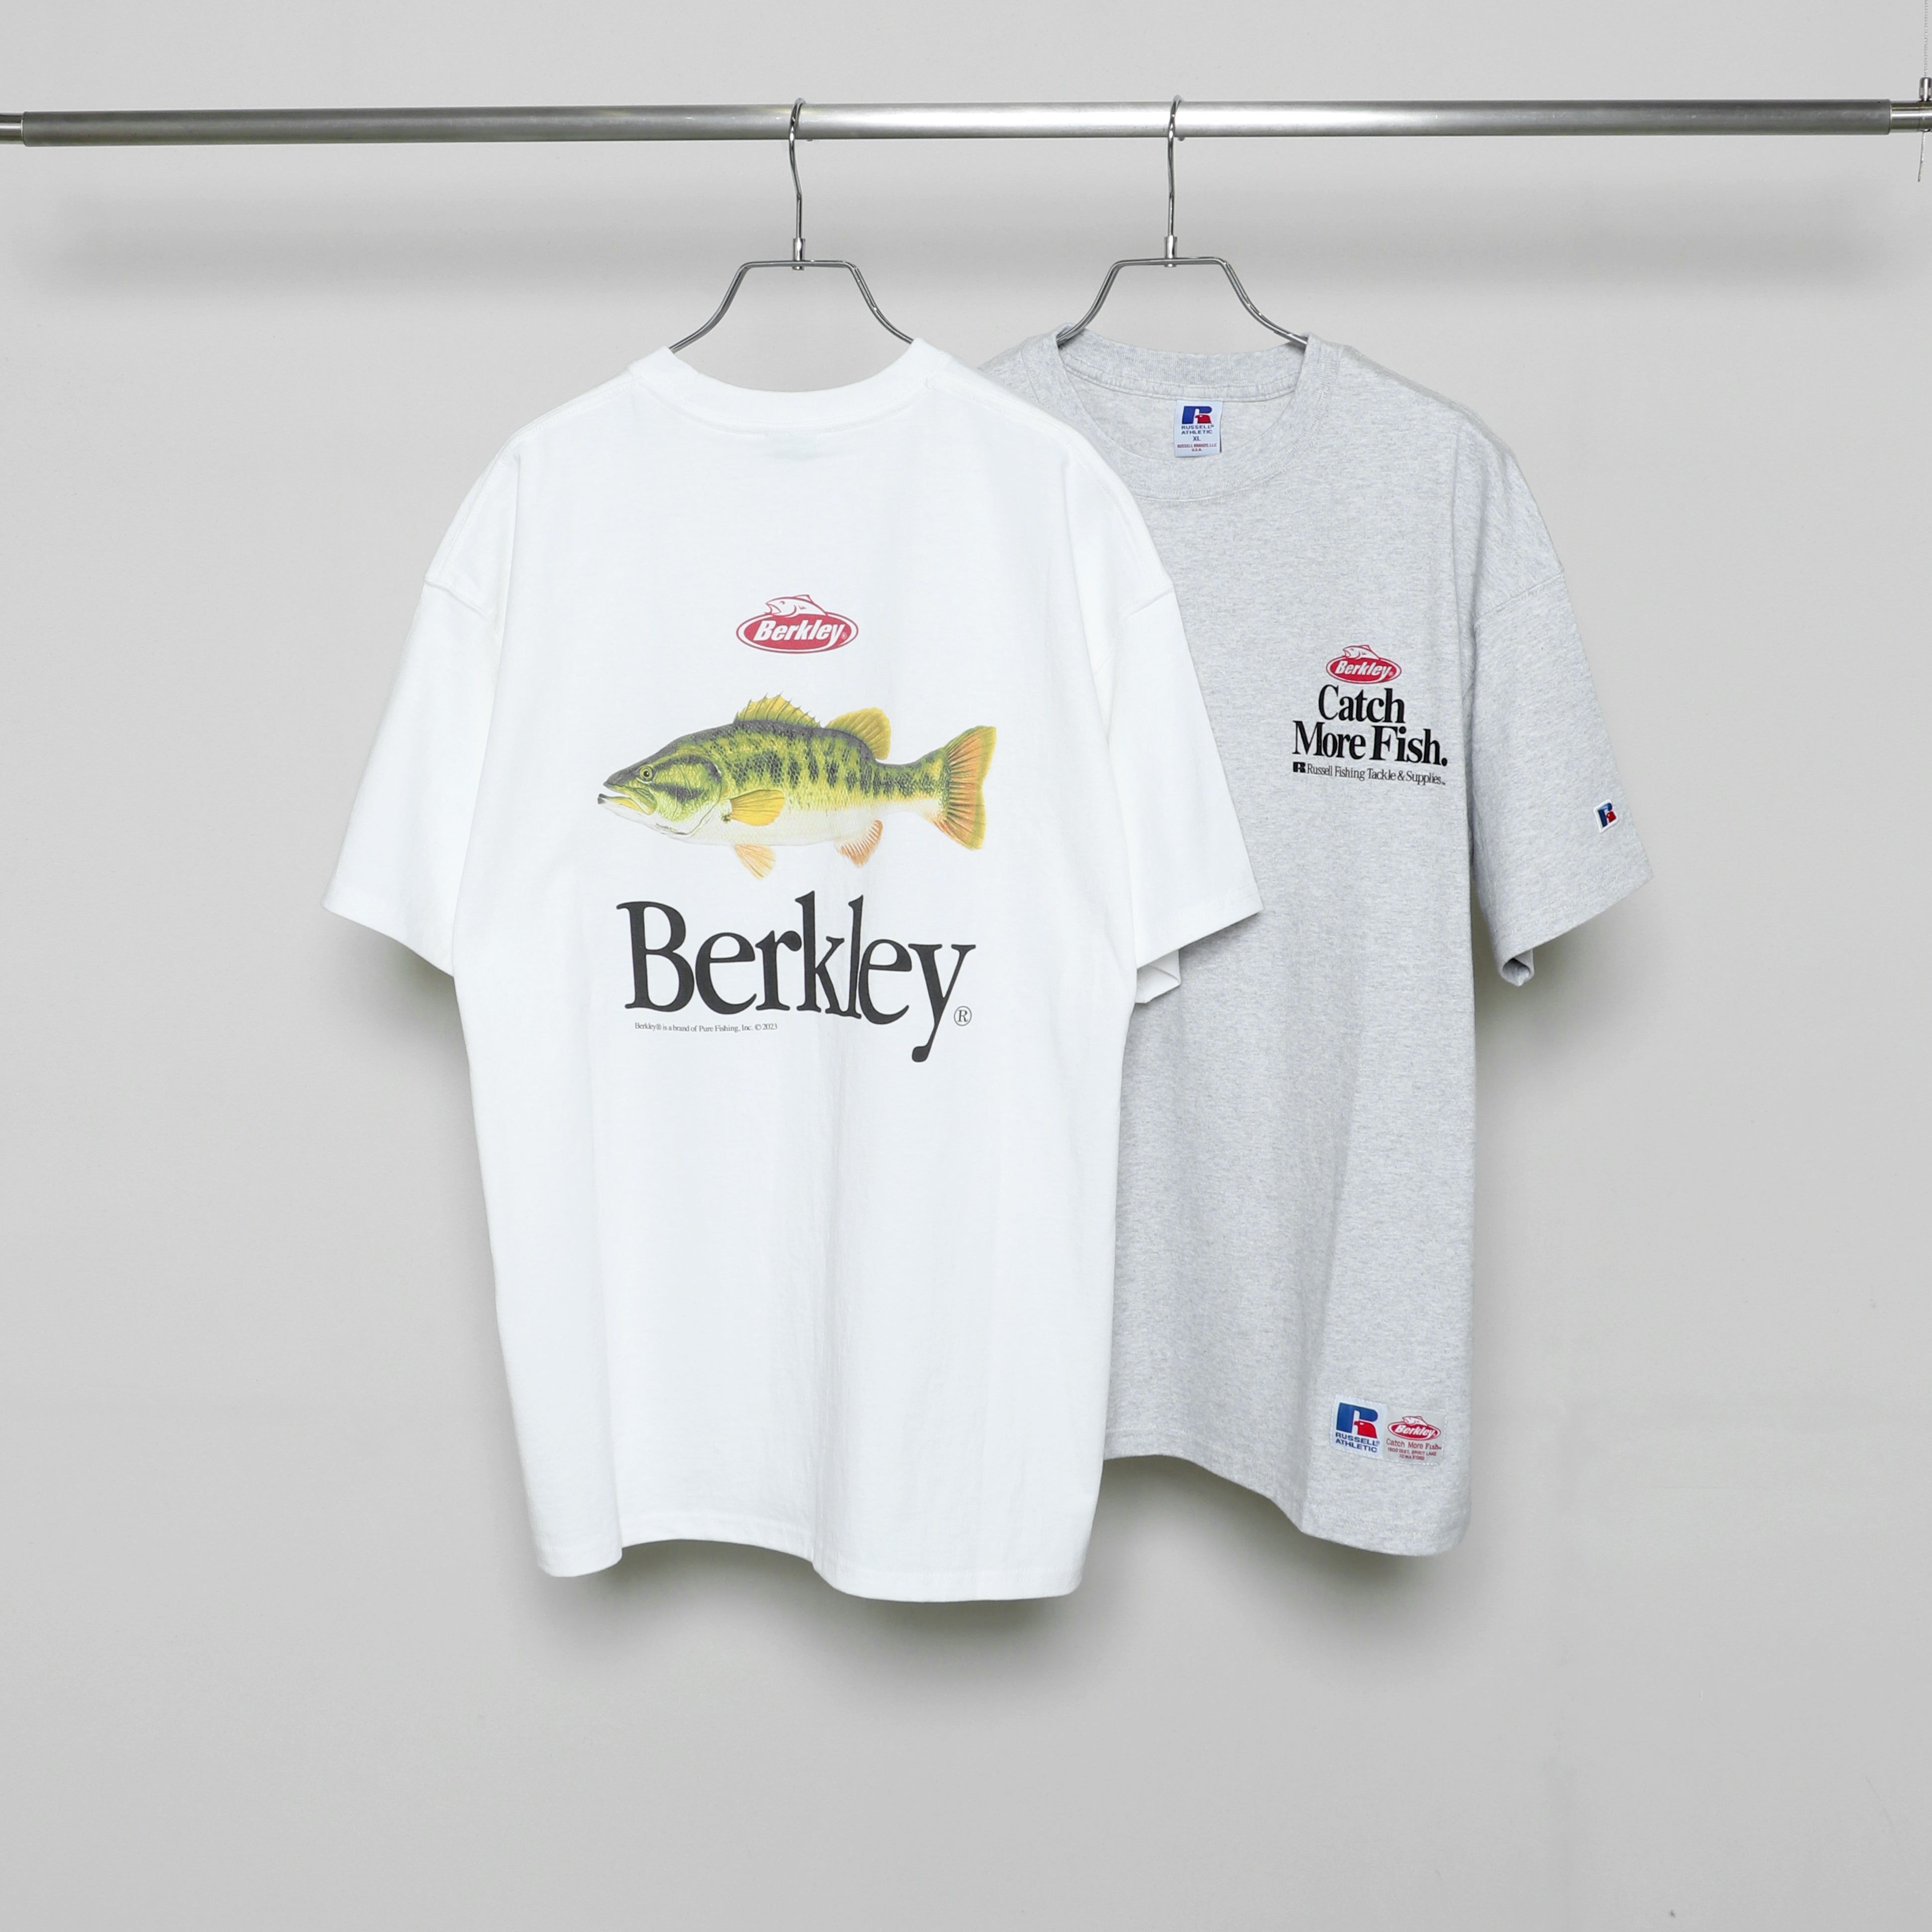 Russell×Berkley® ❛Largemouth Bass❜ Heavy Cotton Jersey S/S  T〈RBK-2402〉RUSSELL ATHLETIC